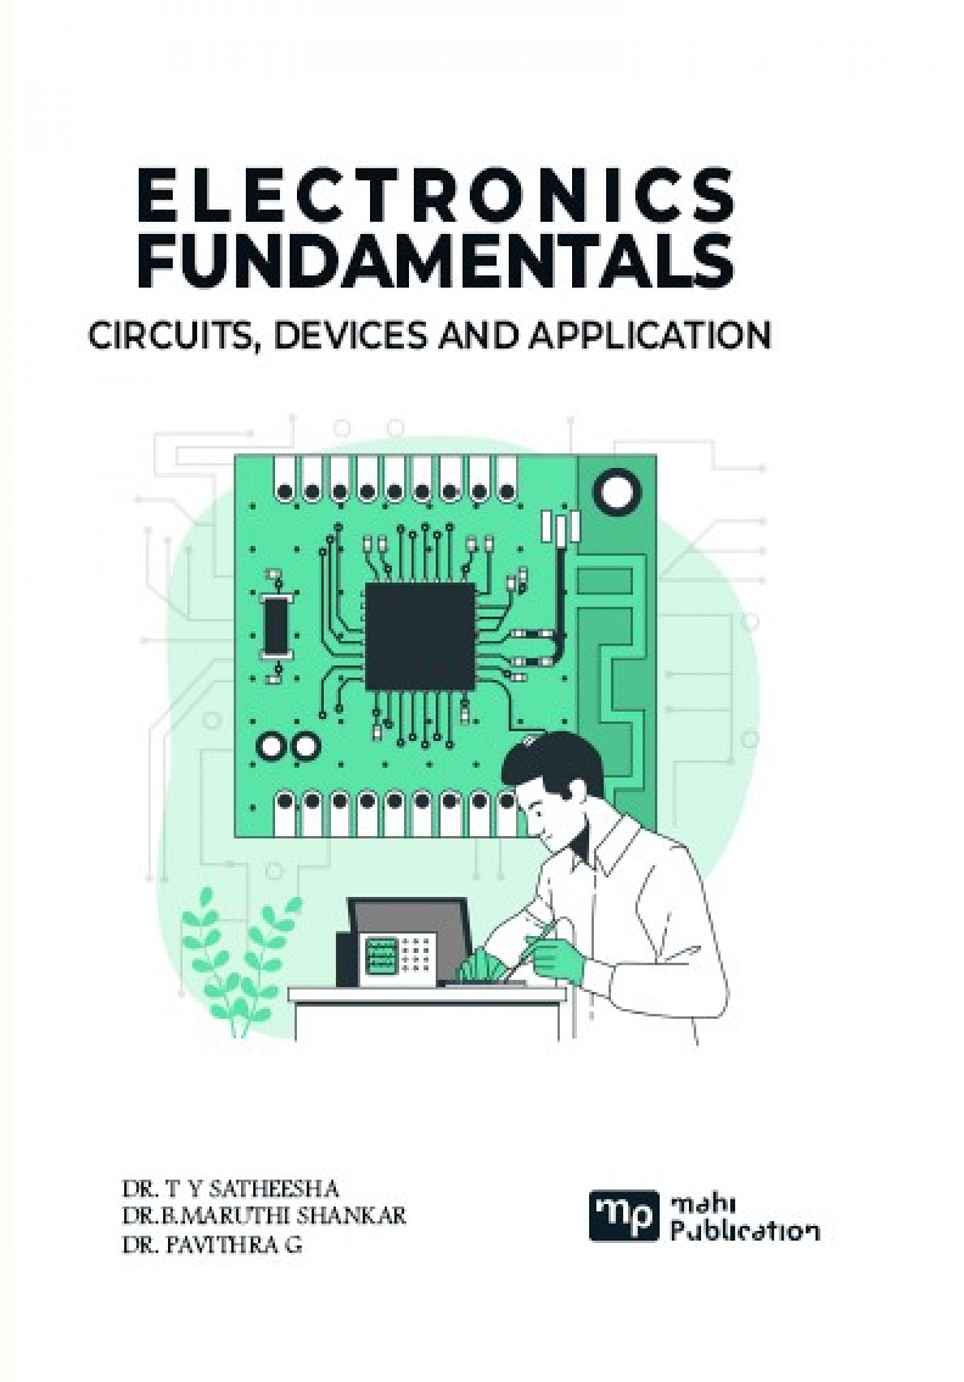 Electronics Fundamentals Circuits, Devices and Application